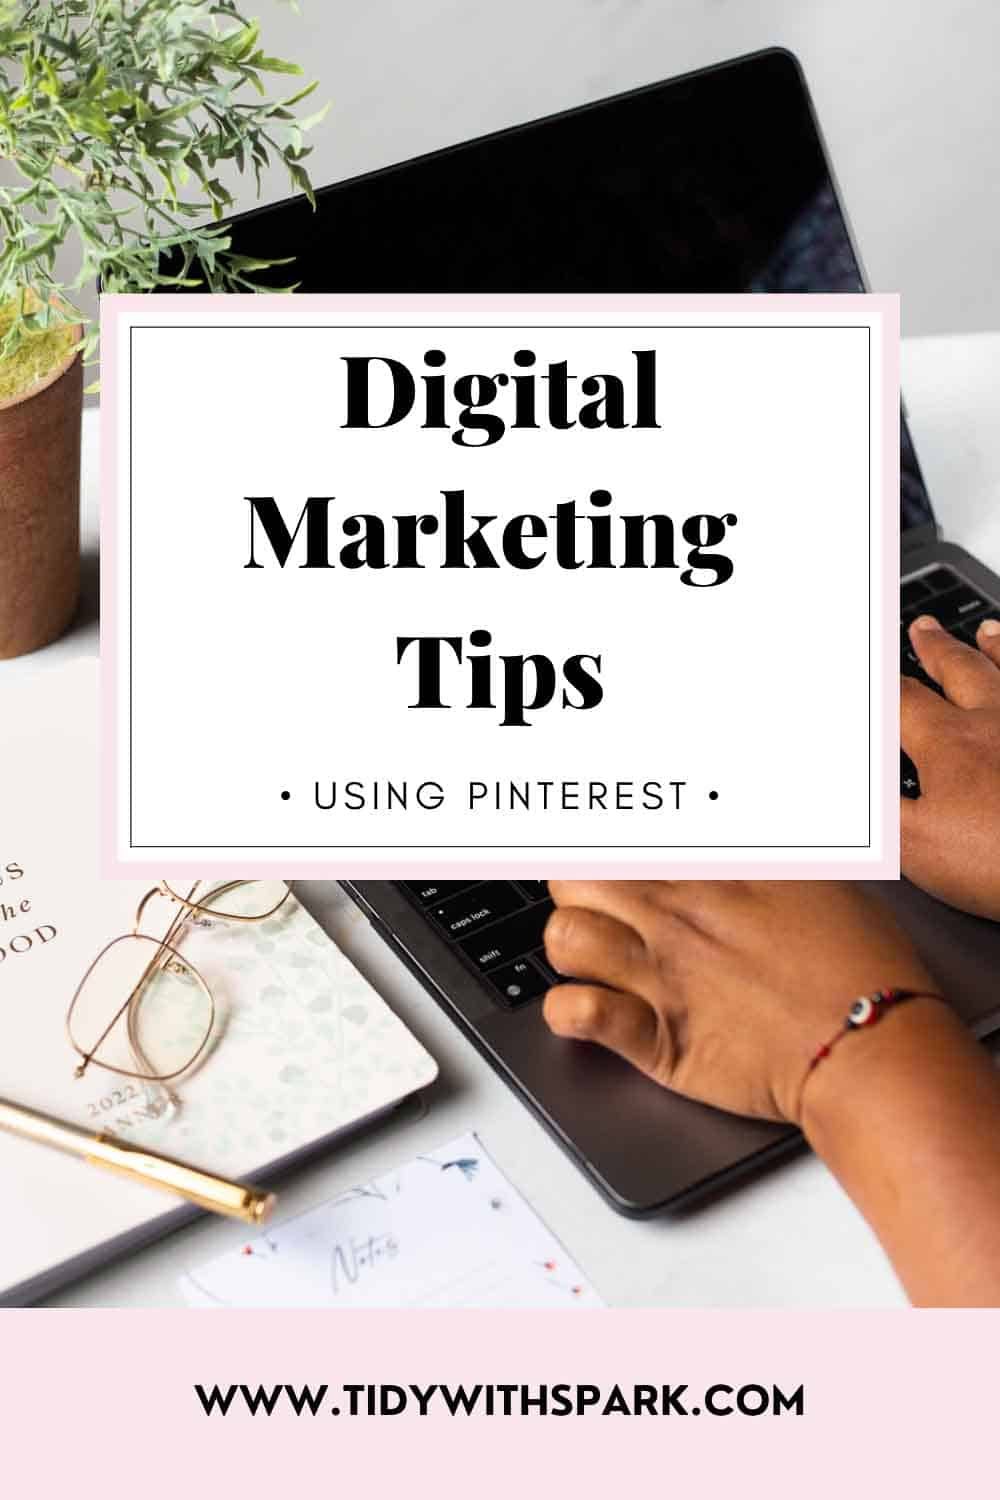 Promotional image sharing How to use Pinterest for marketing your business for Tidy with SPARK blog